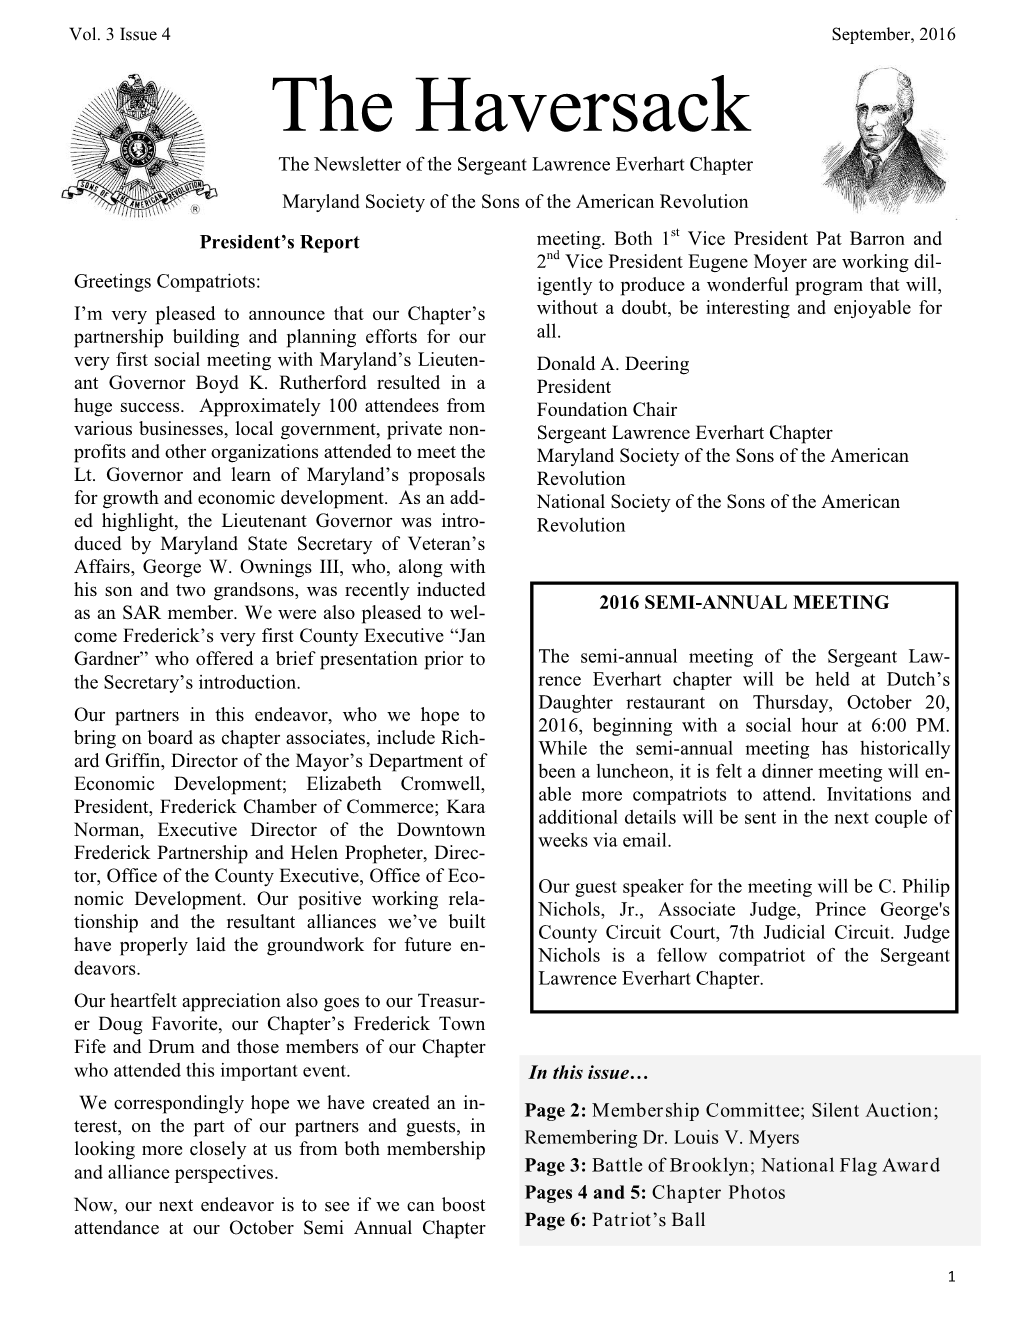 The Haversack the Newsletter of the Sergeant Lawrence Everhart Chapter Maryland Society of the Sons of the American Revolution